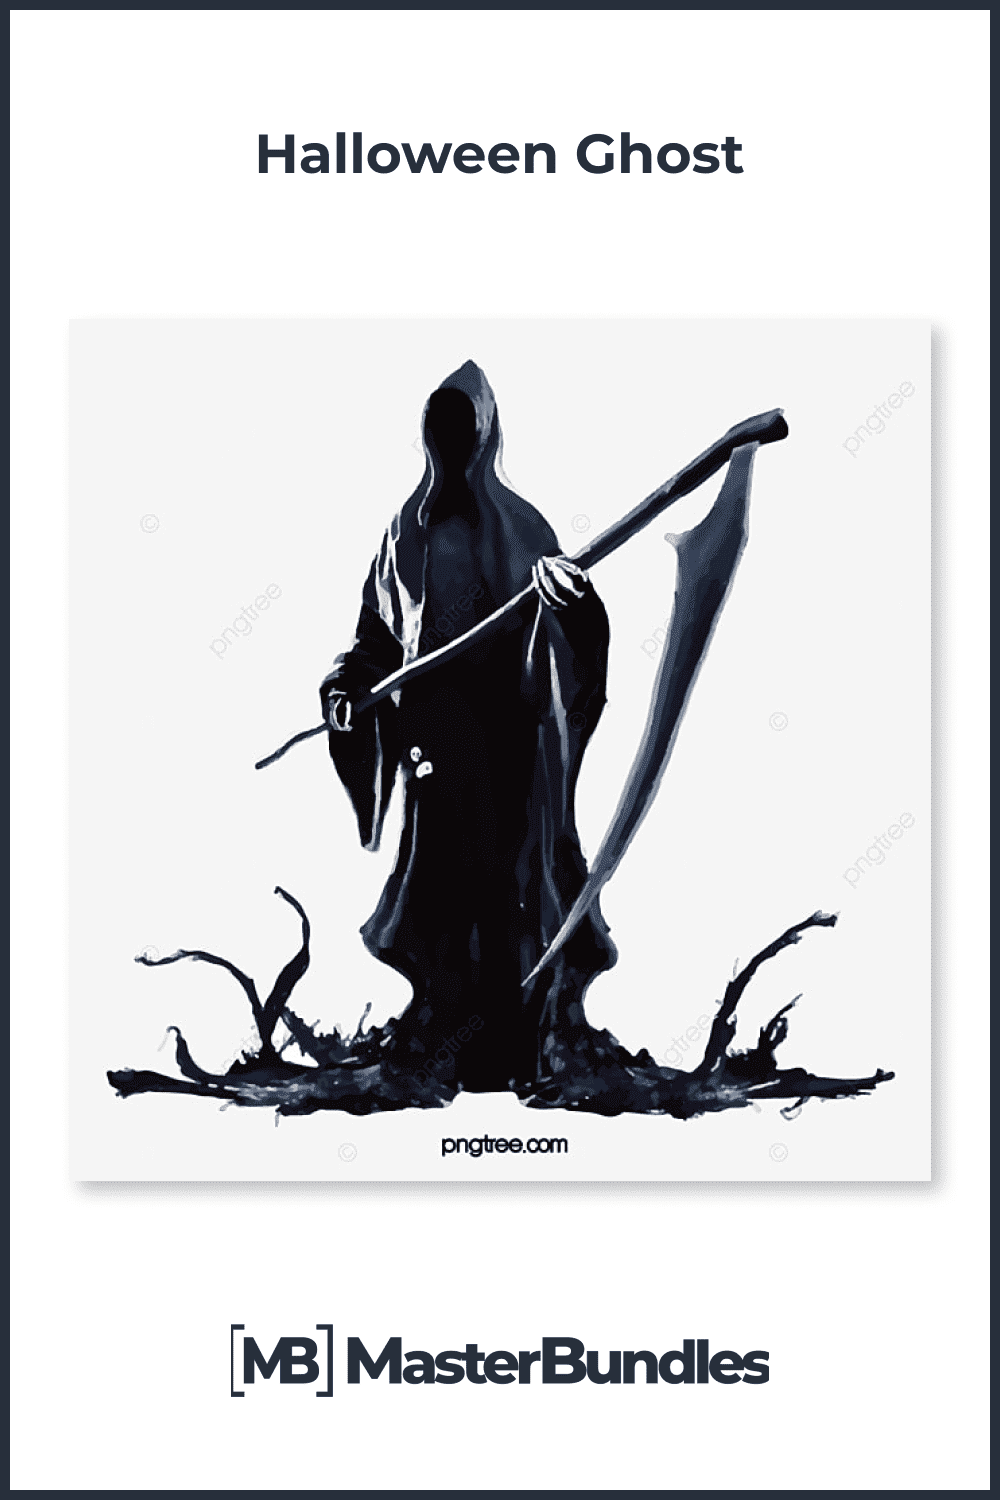 When death came with a scythe to resolve issues for the holiday.